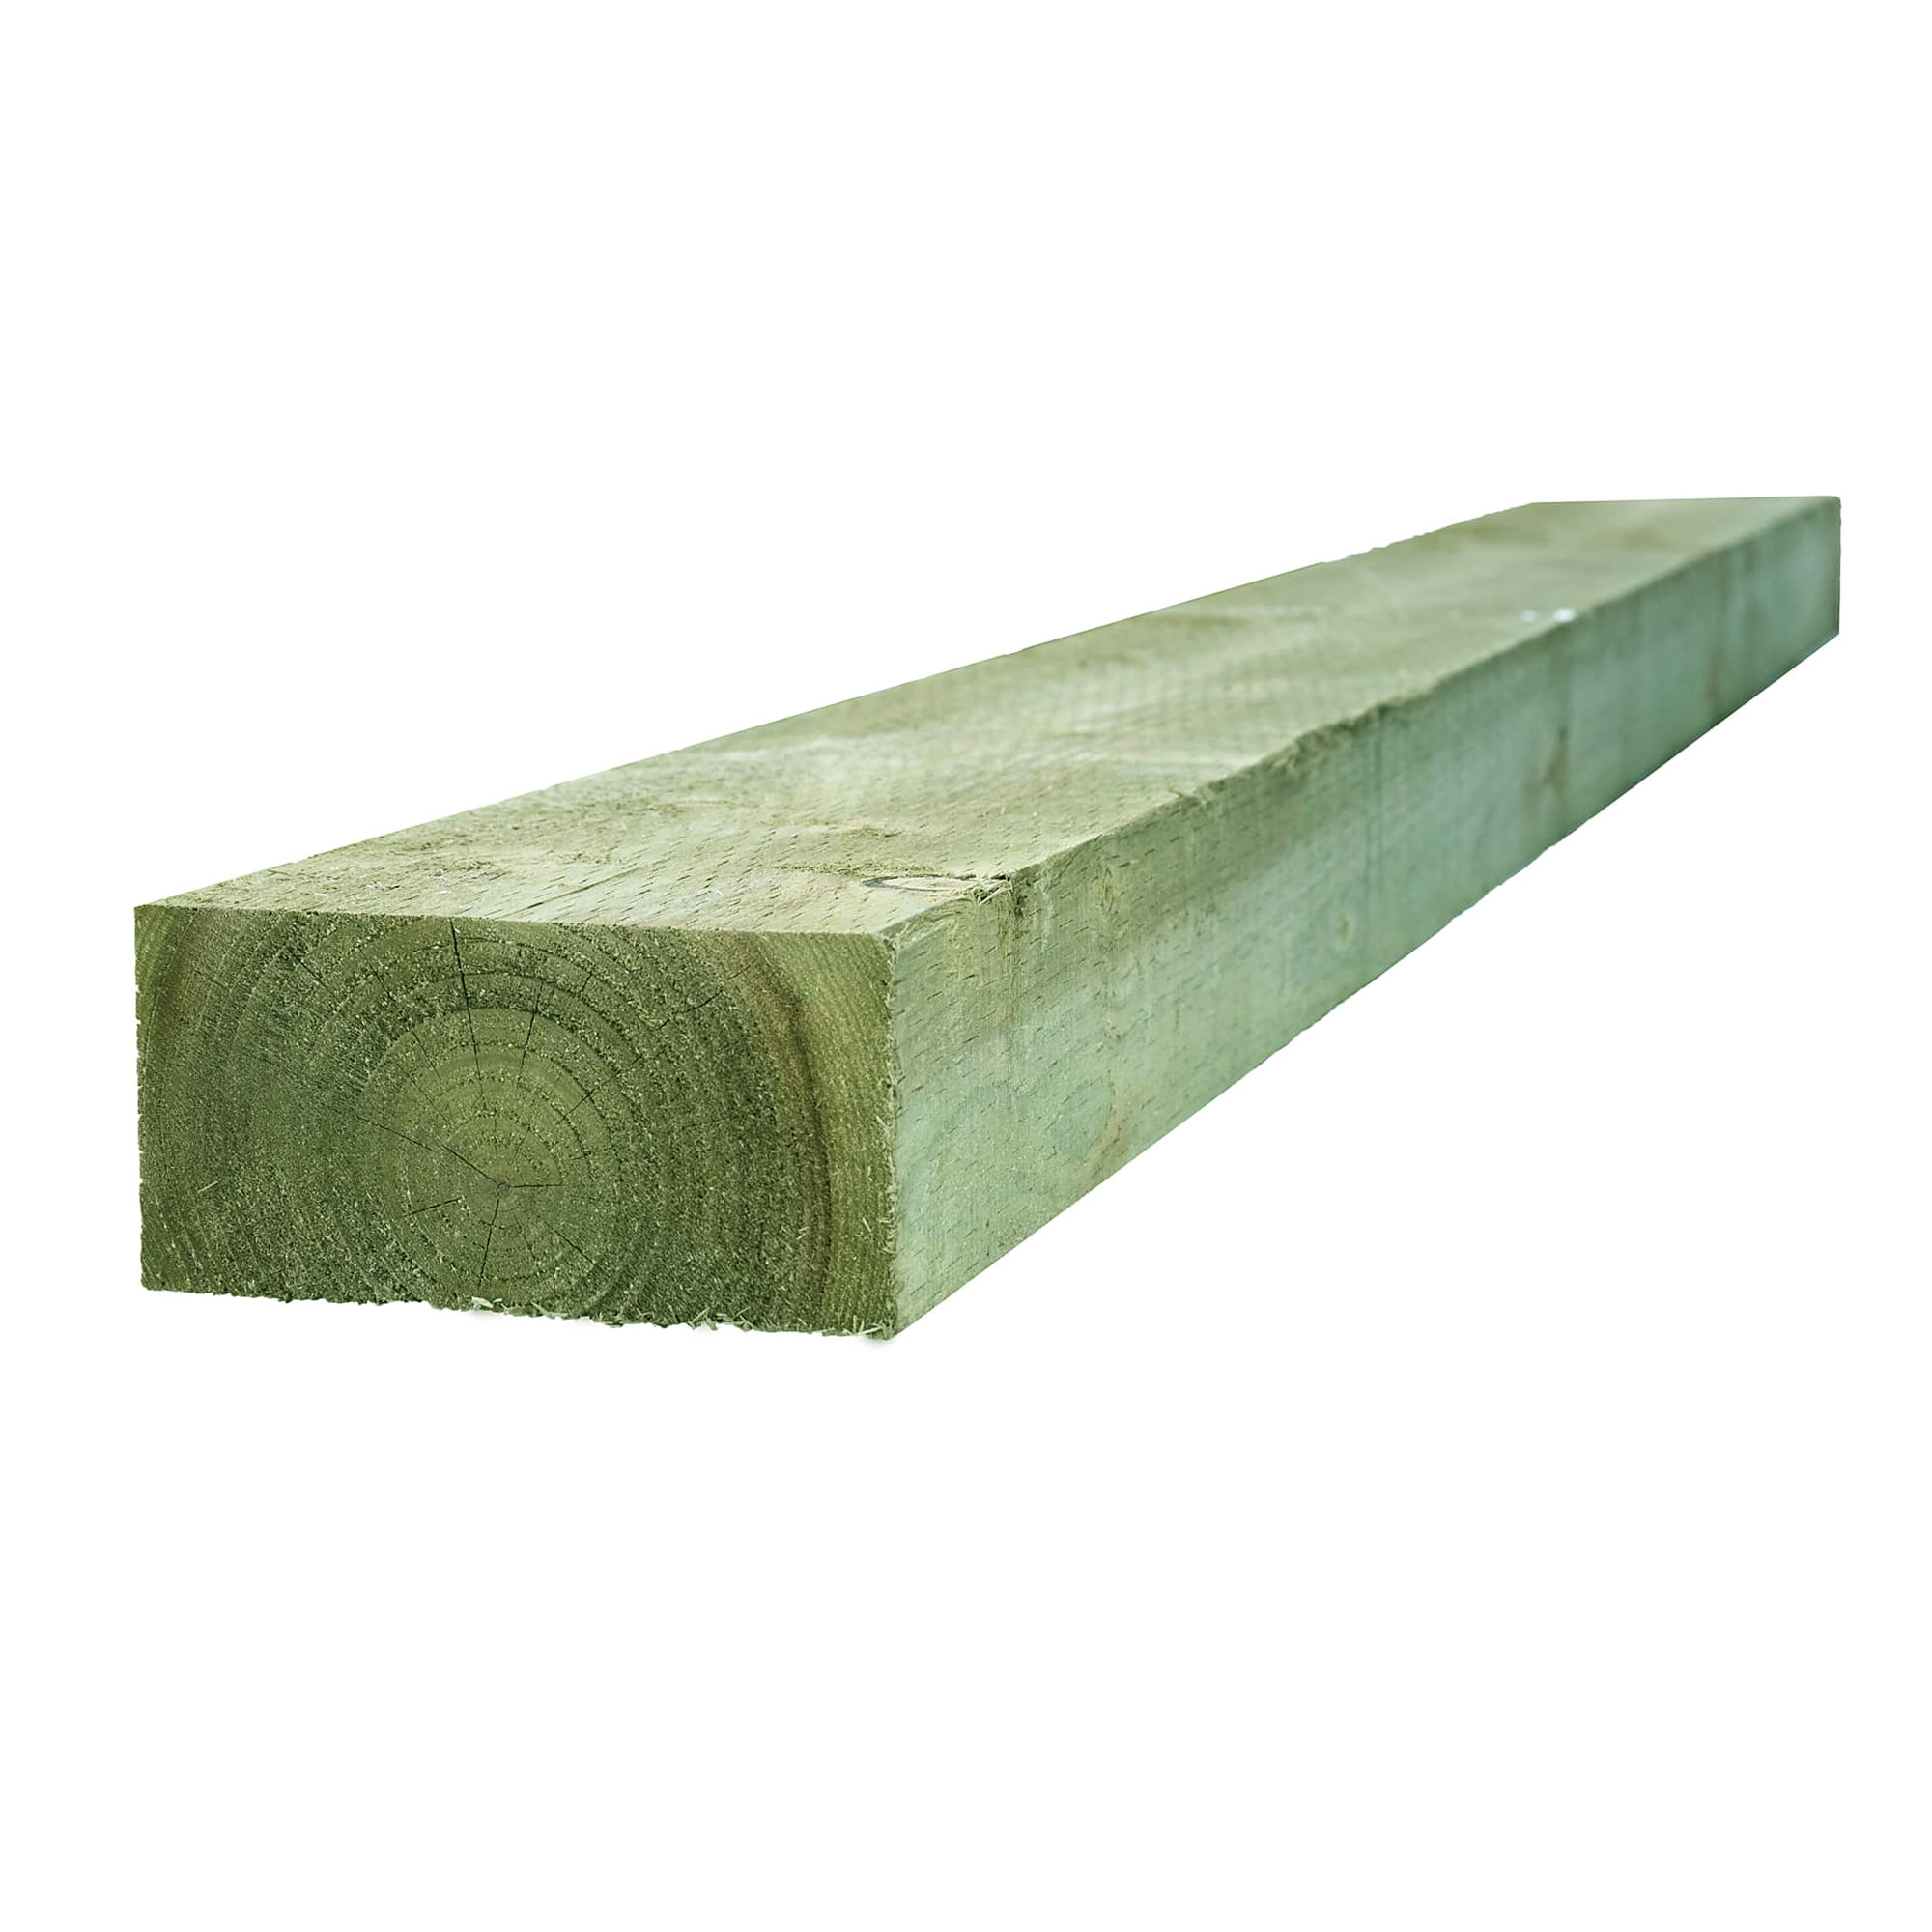 Garden Sleeper Treated Softwood Tanalised Green (Finished Size 120mm x 245mm)